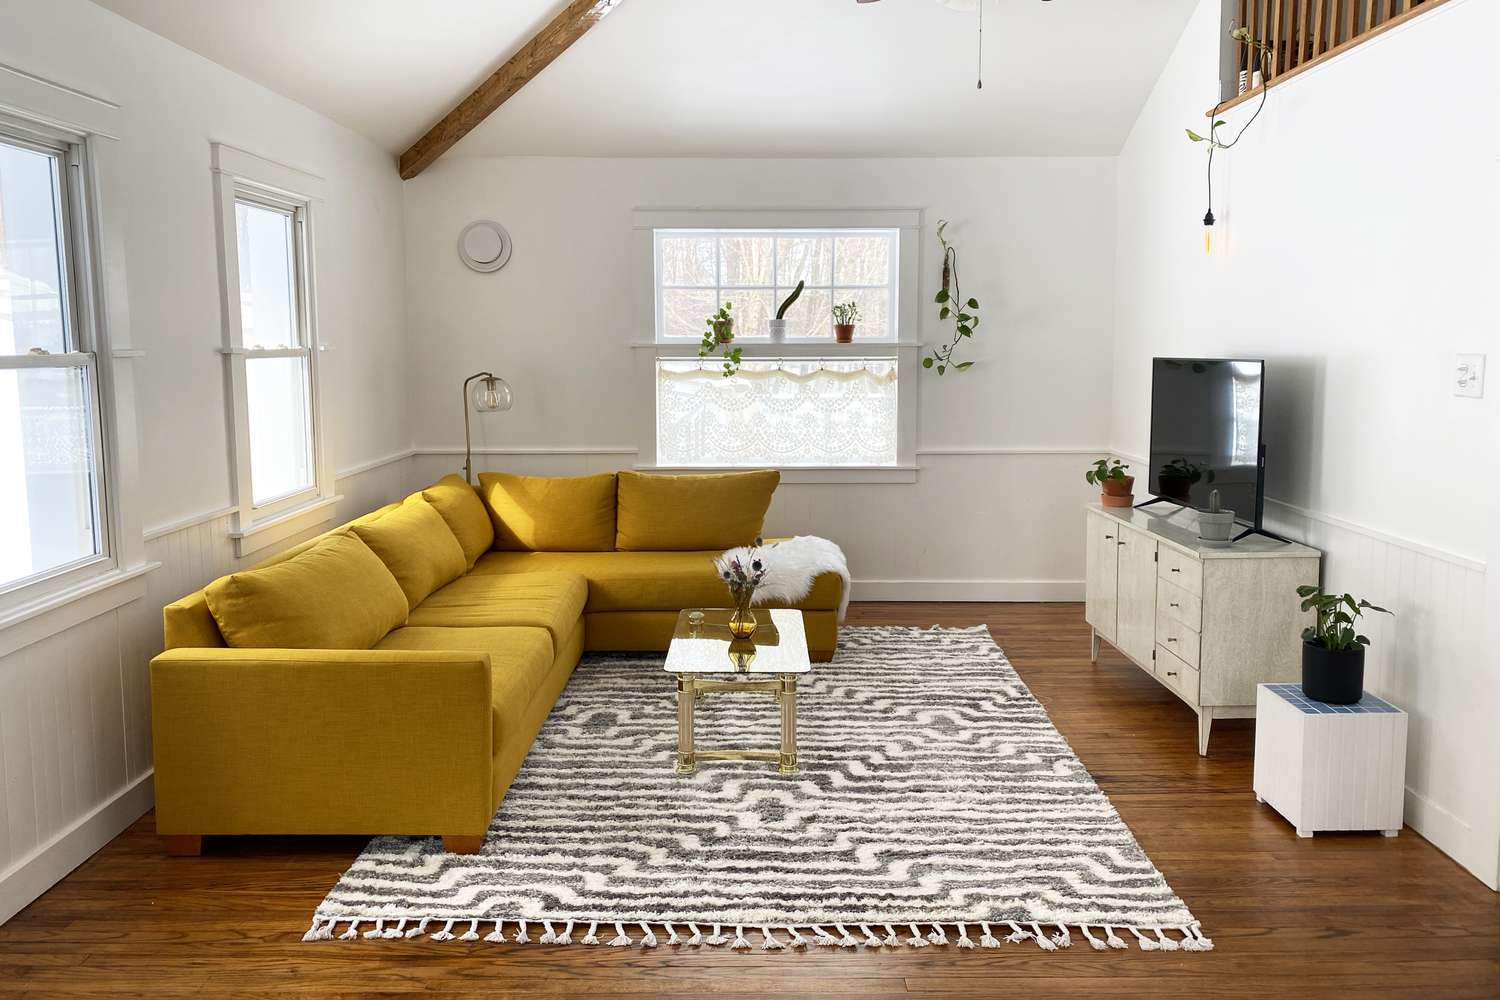 How Big Should A Rug Be In Living Room